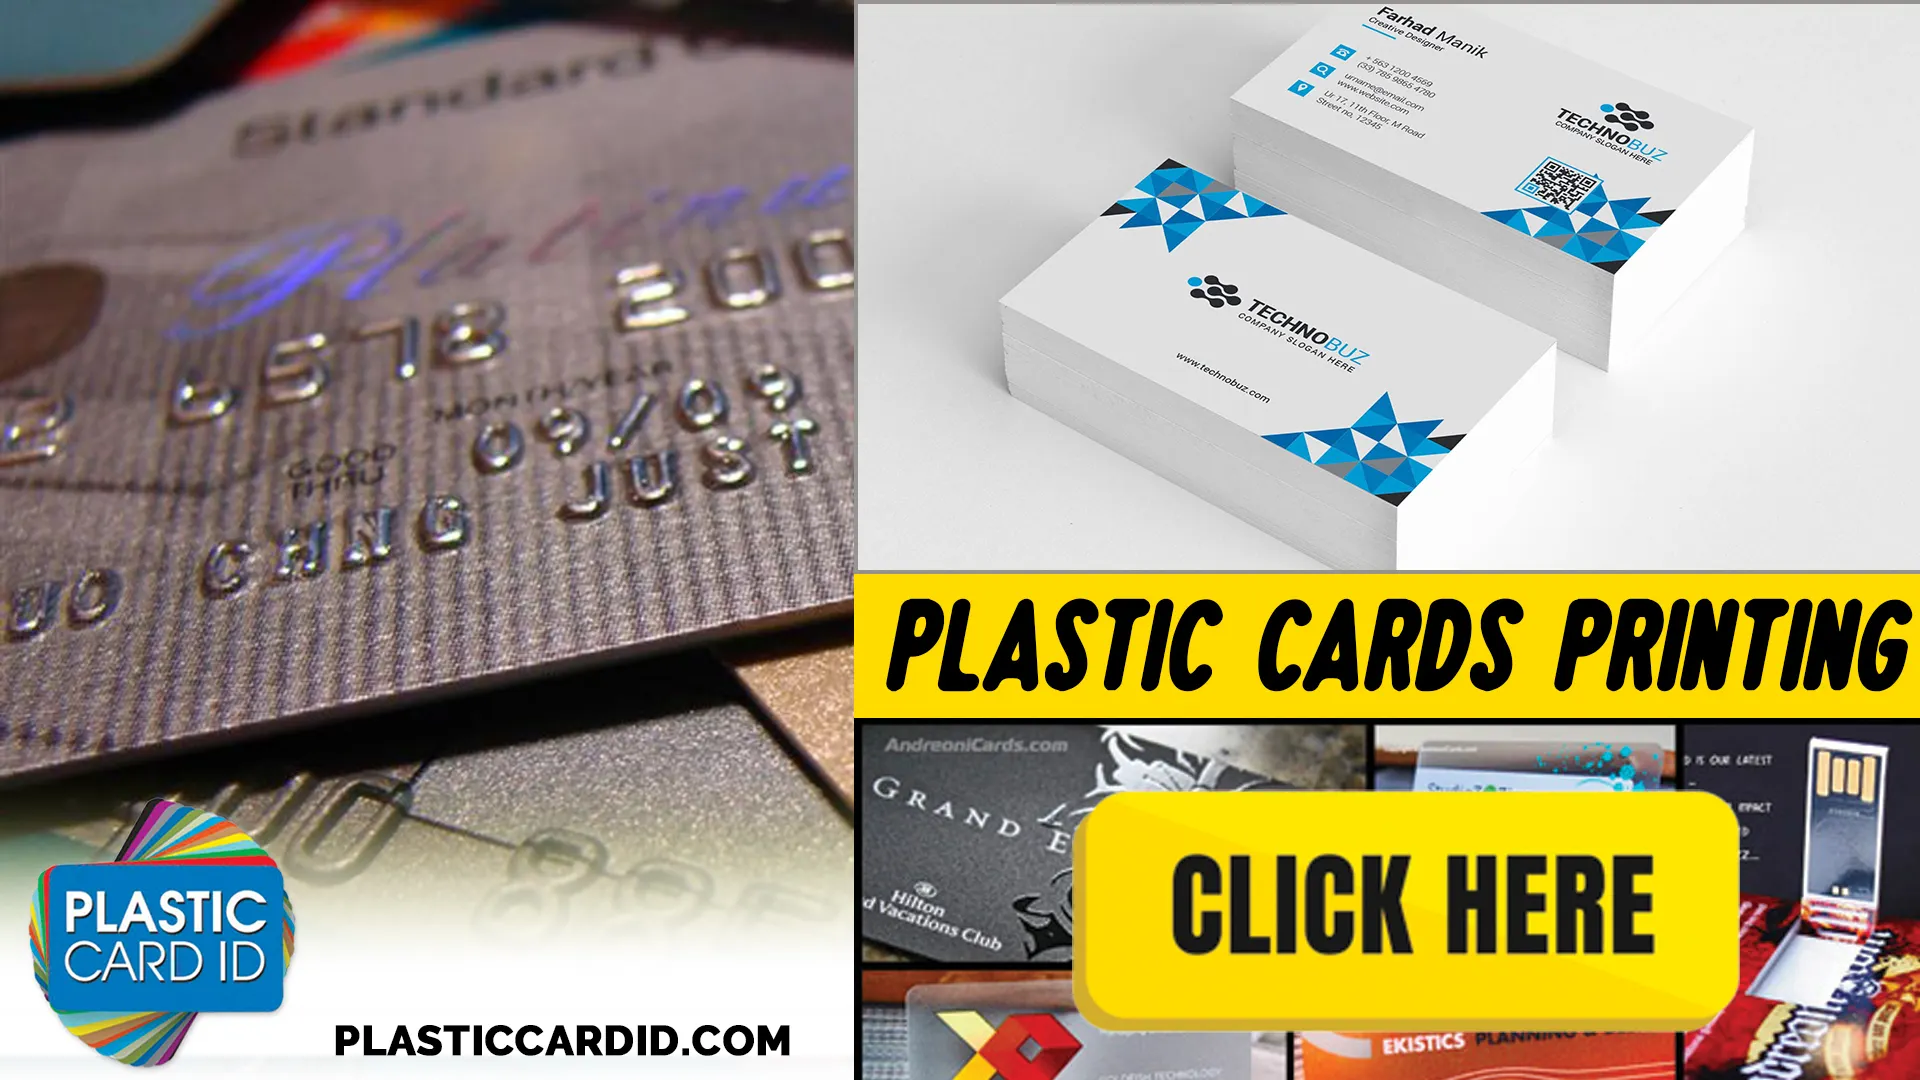 How to Use Your Plastic Card ID
 Cleaning Kit